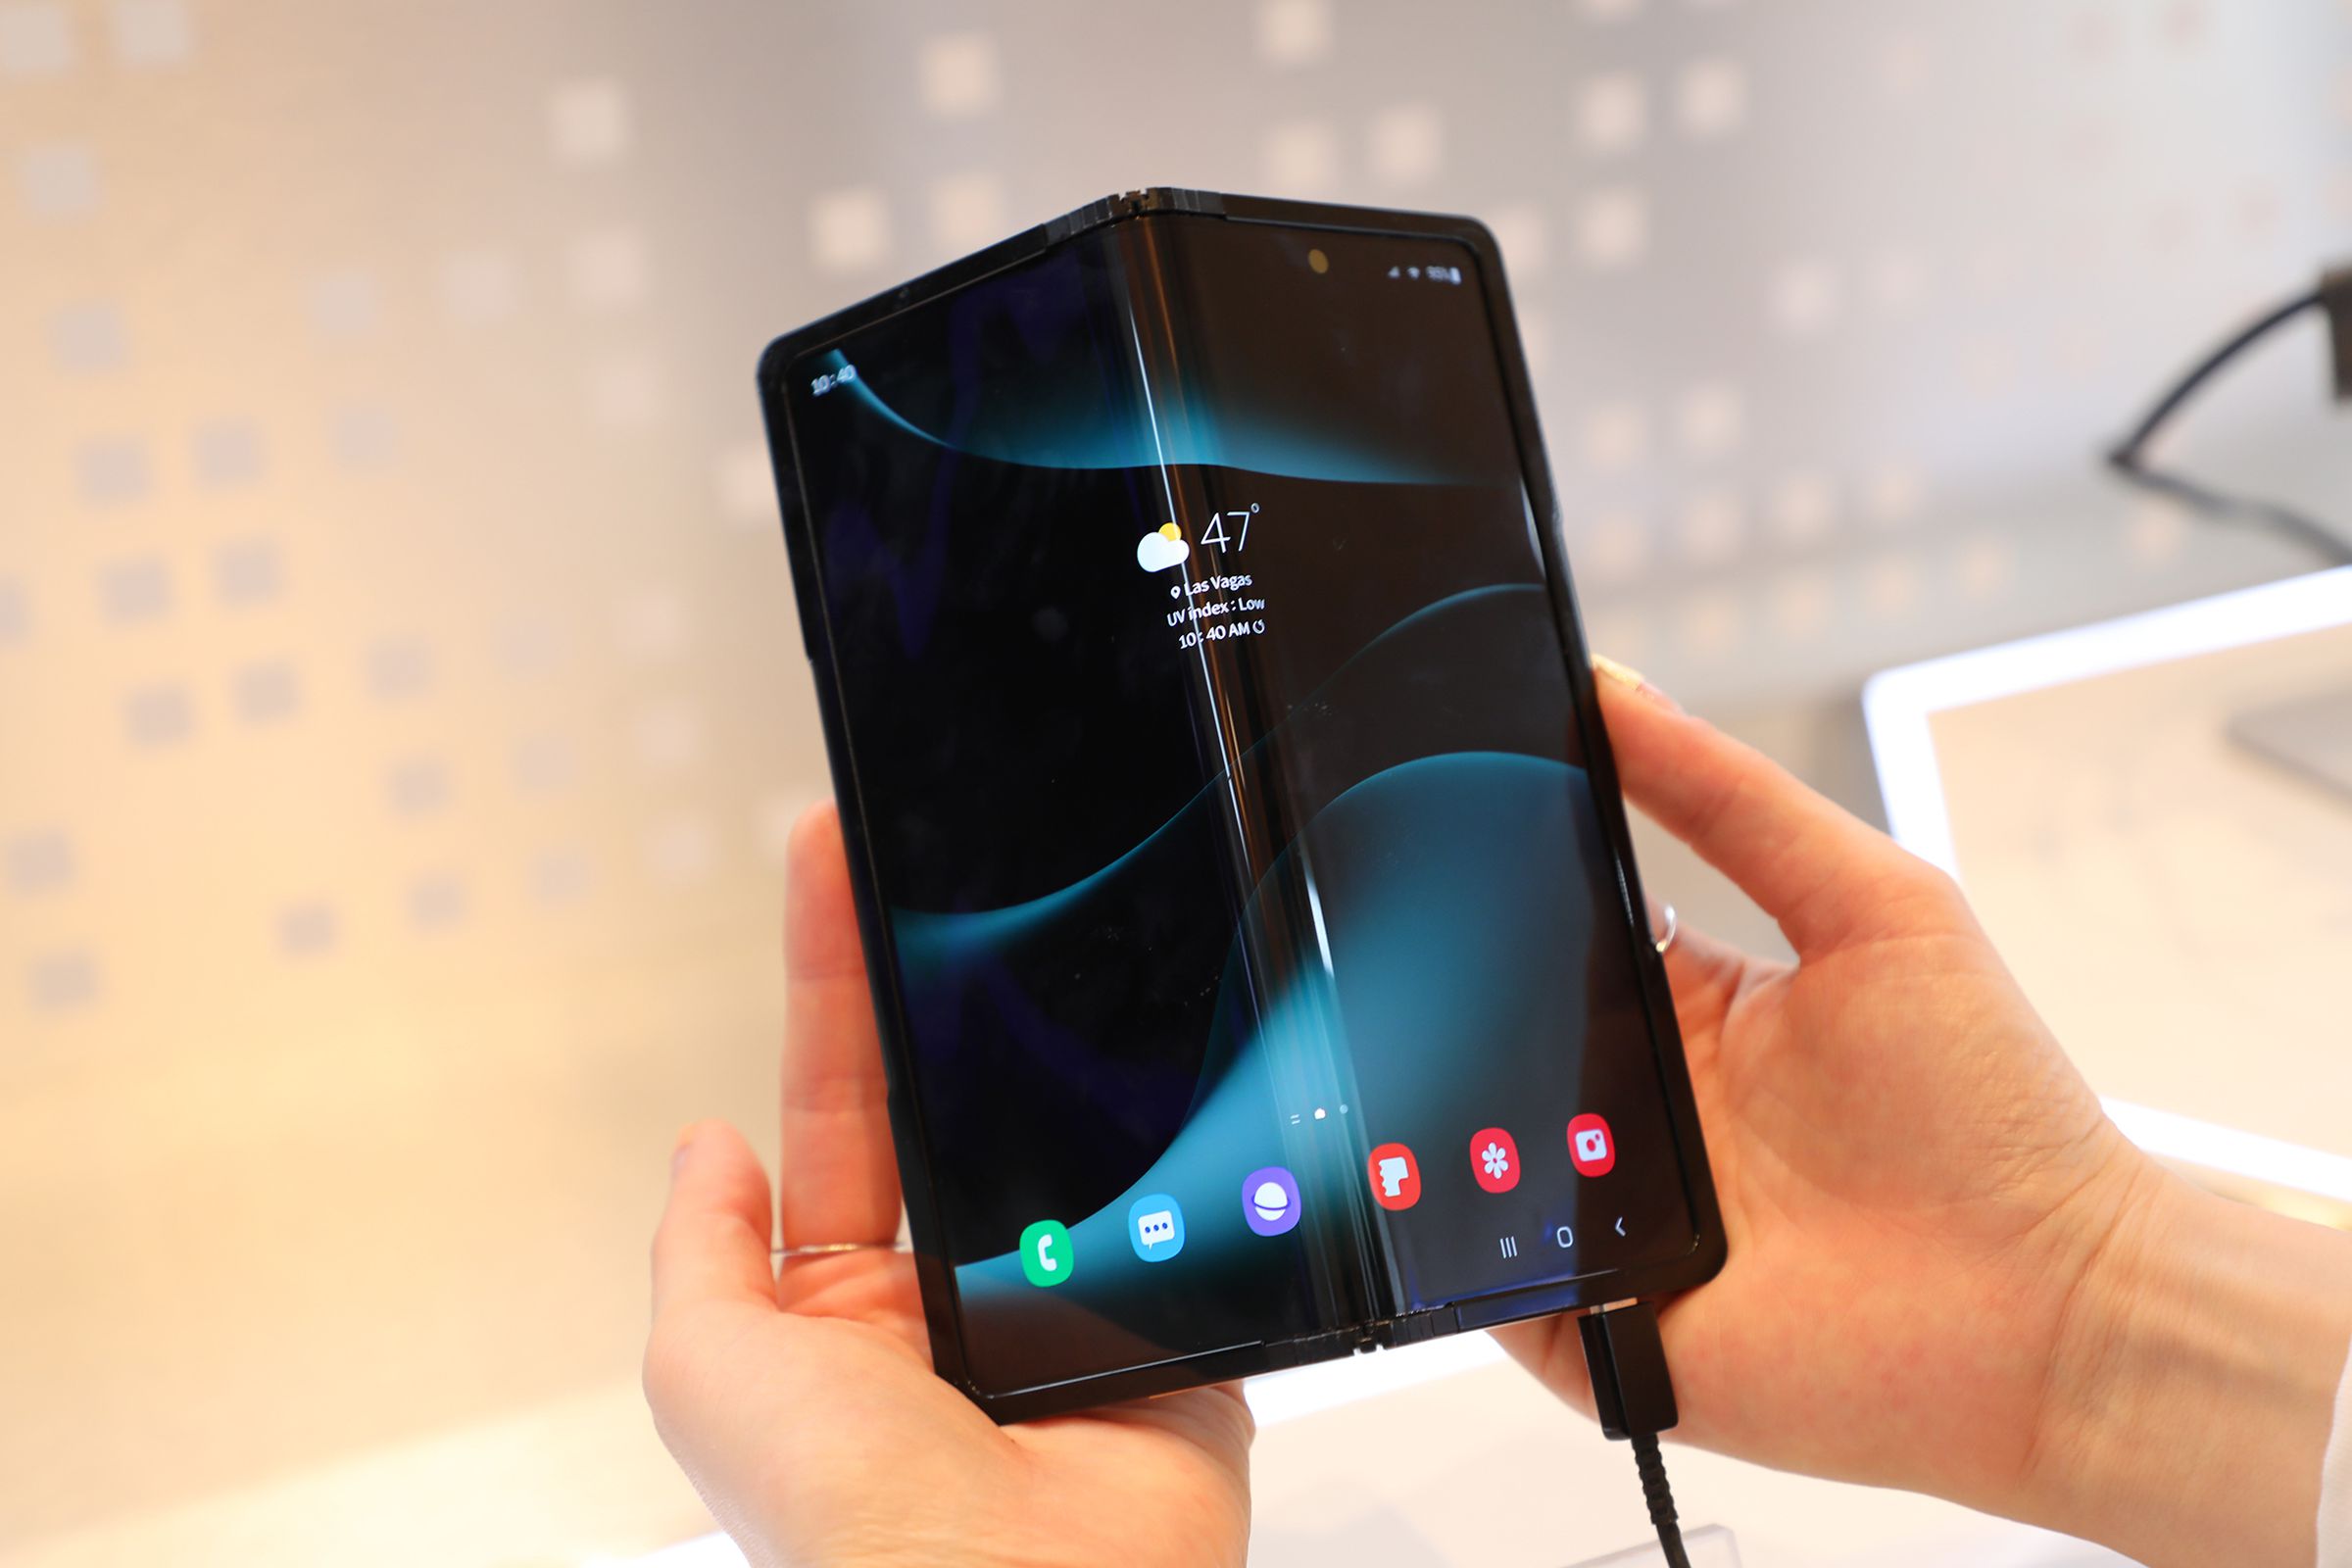 Samsung Display shows off a new folding phone hinge that can rotate 360 degrees